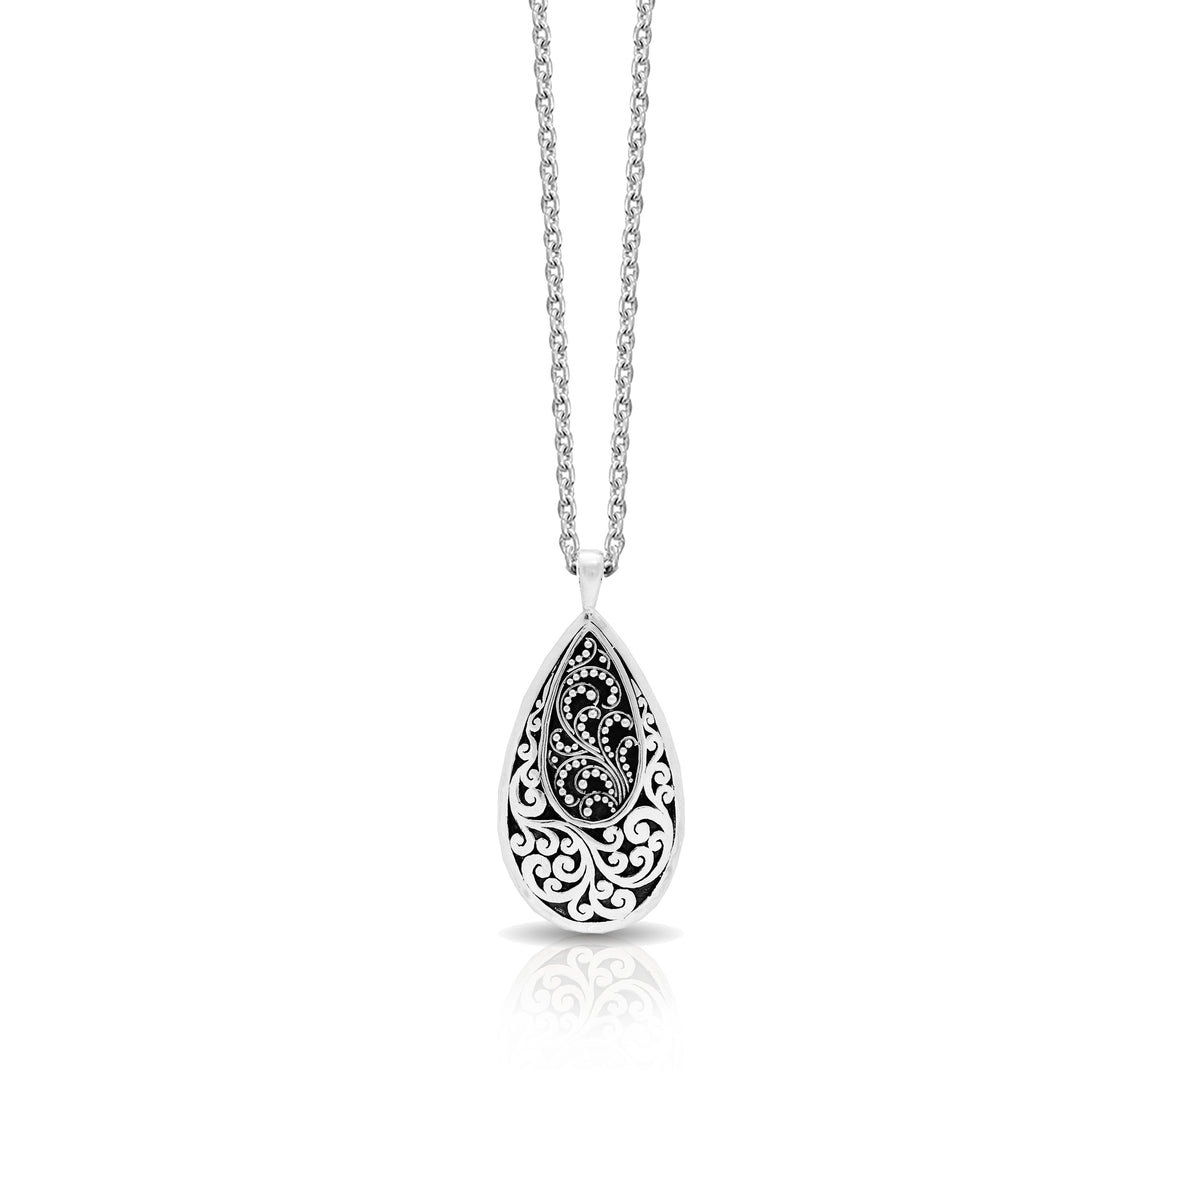 LH Scroll Tear Drop with Granulated Necklace